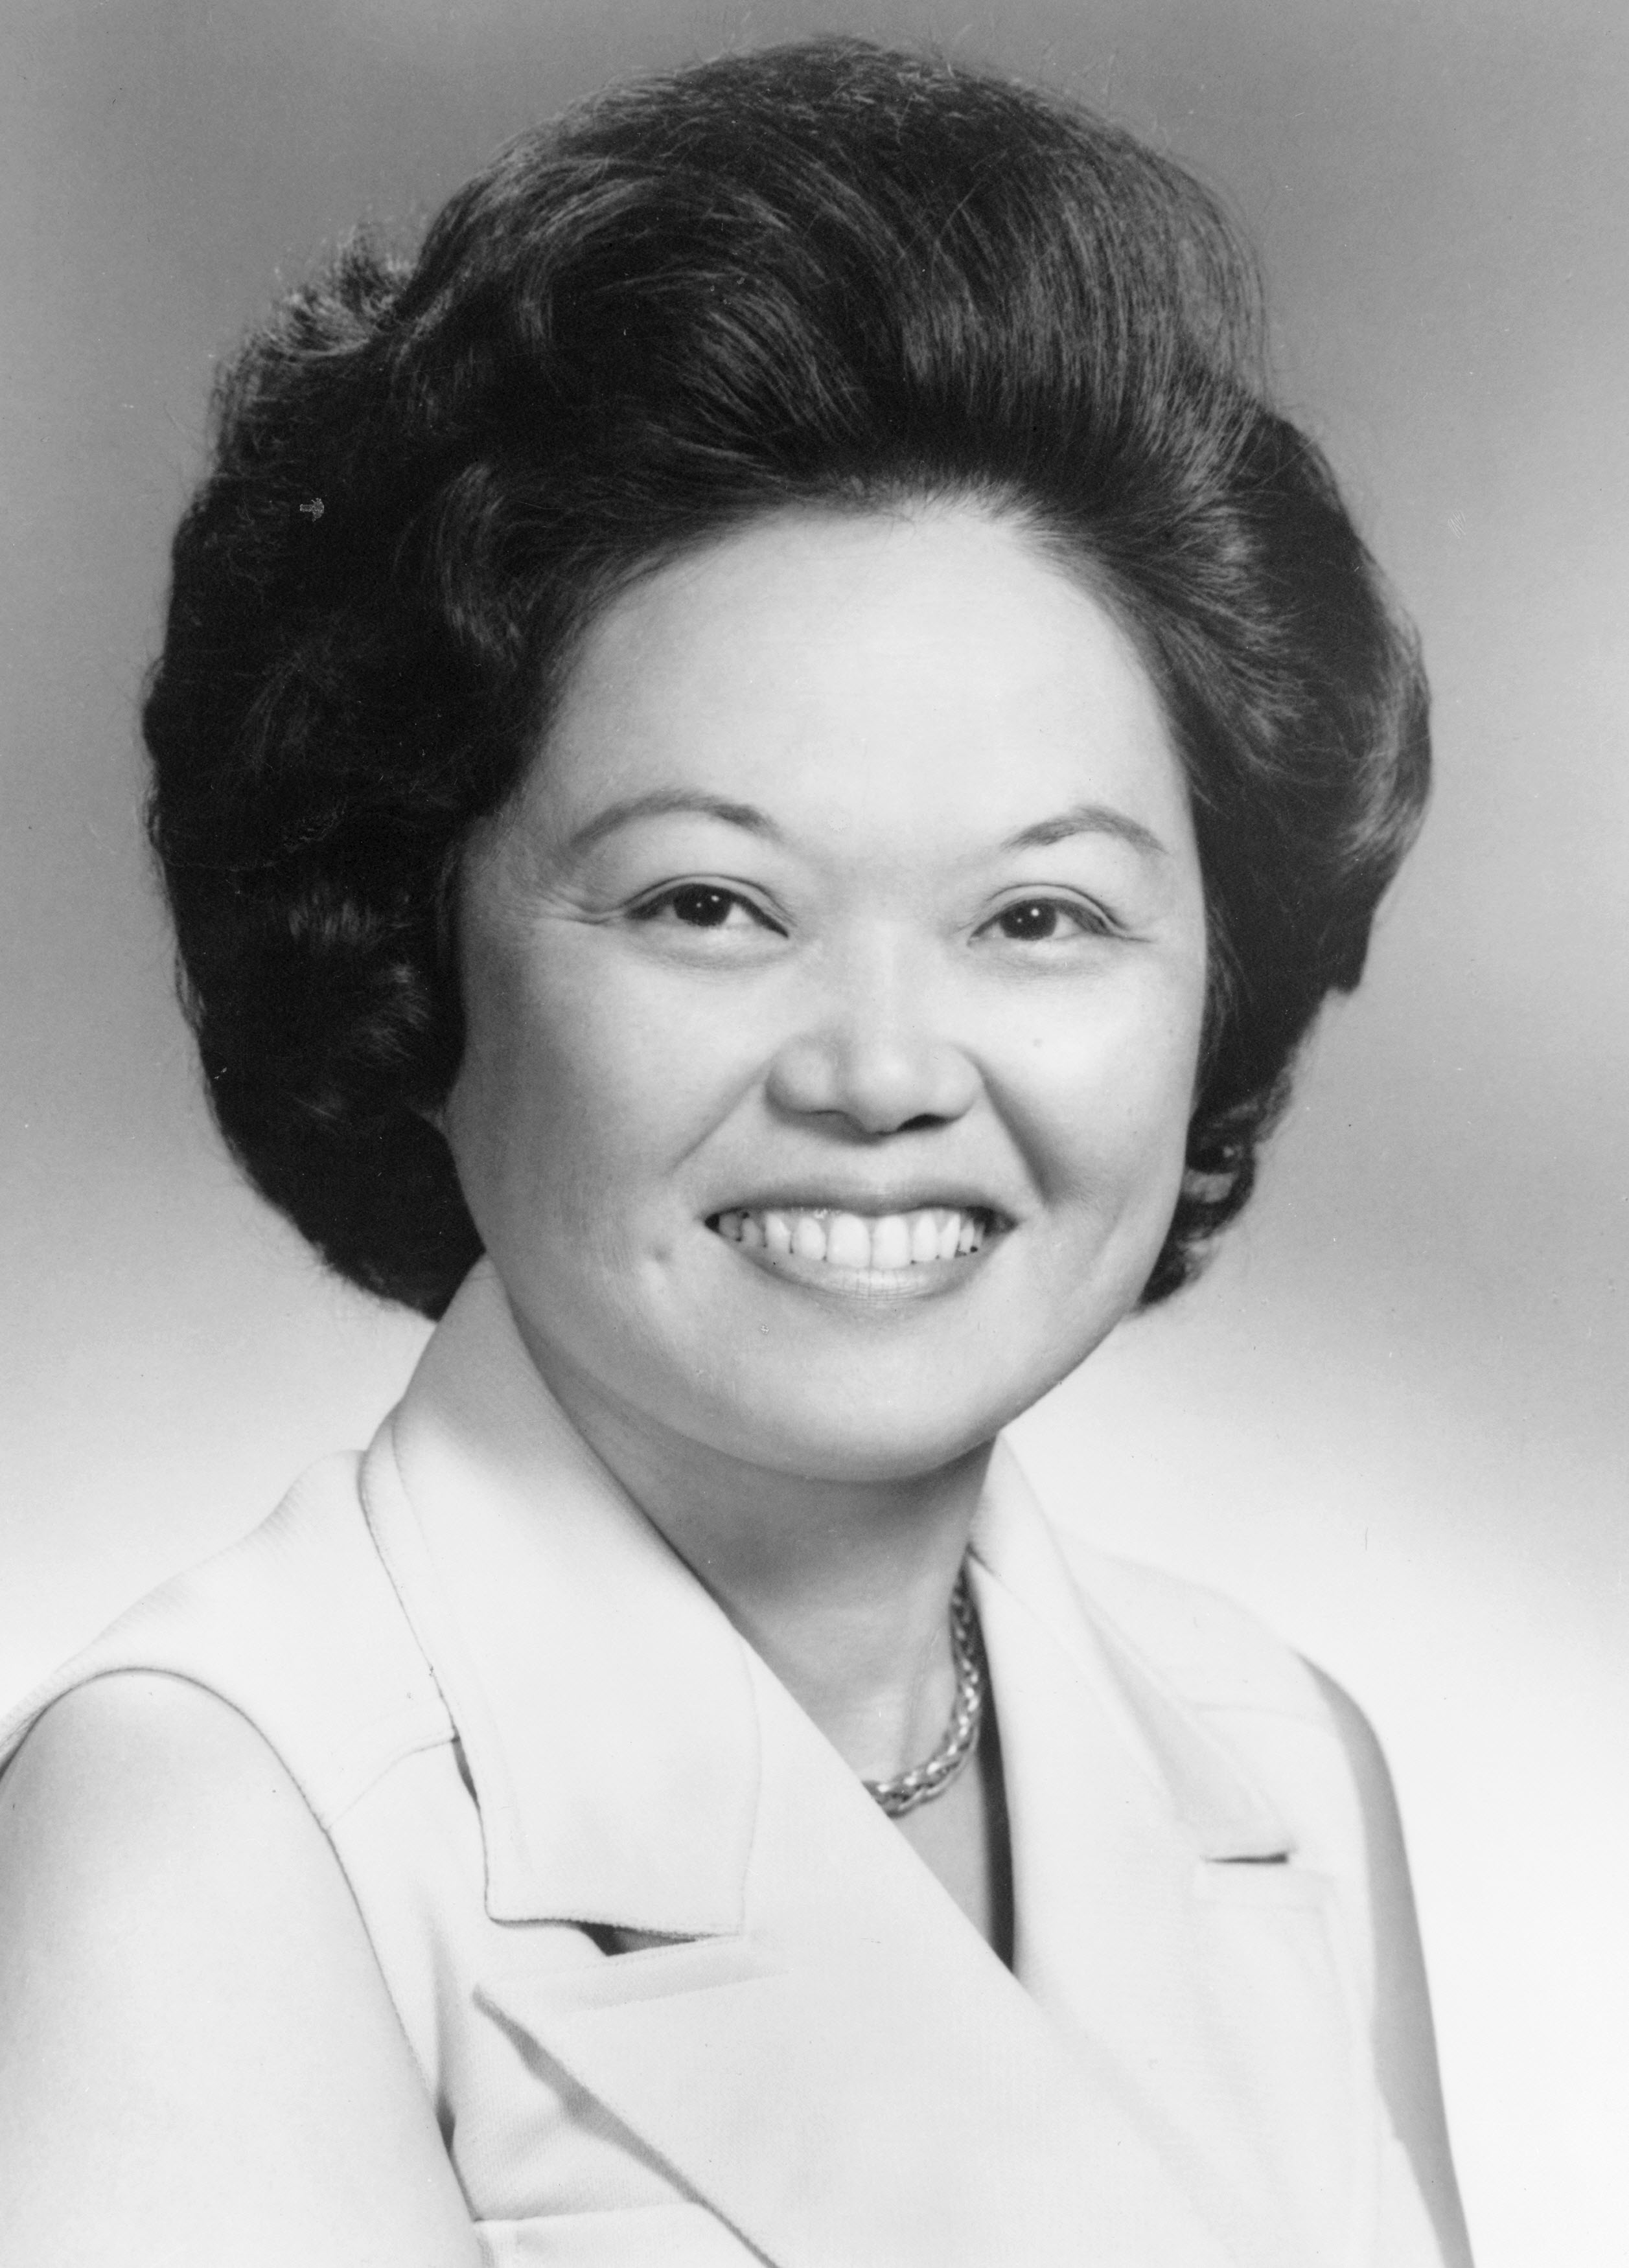 Congressional portrait of Patsy Mink